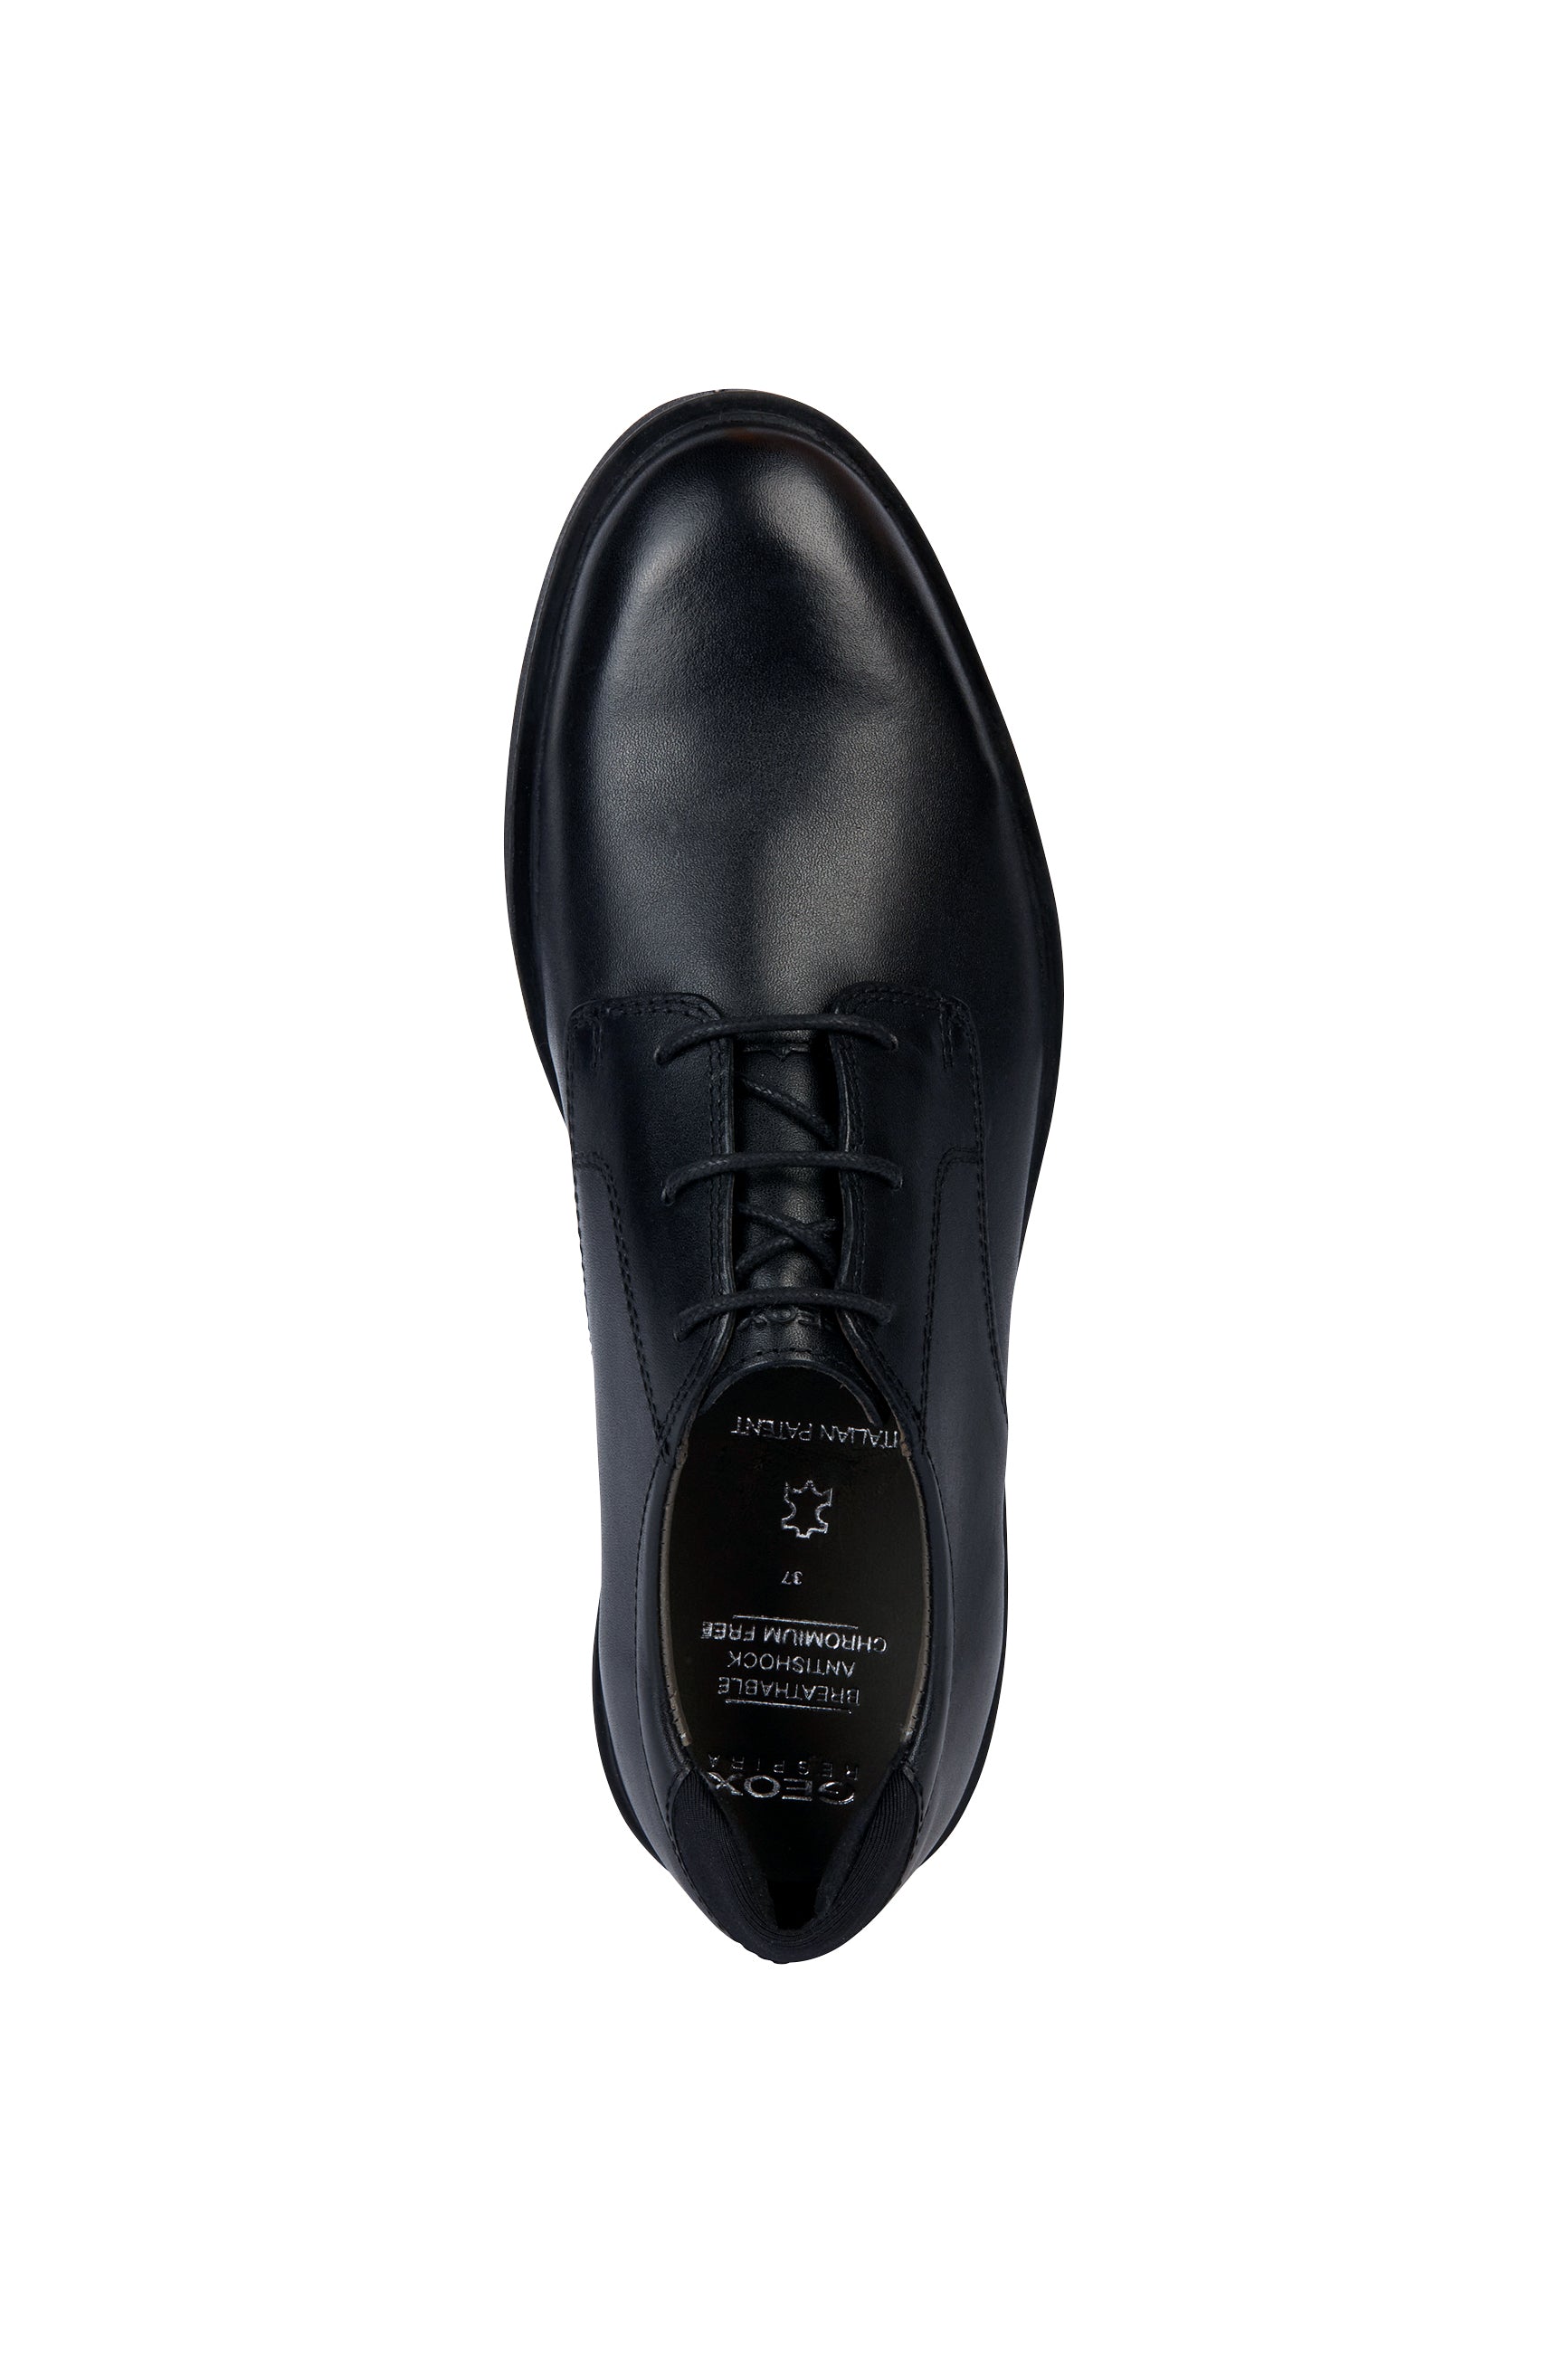 A senior boys school shoe by Geox, style Zheeno, lace-up in black leather. View above. 